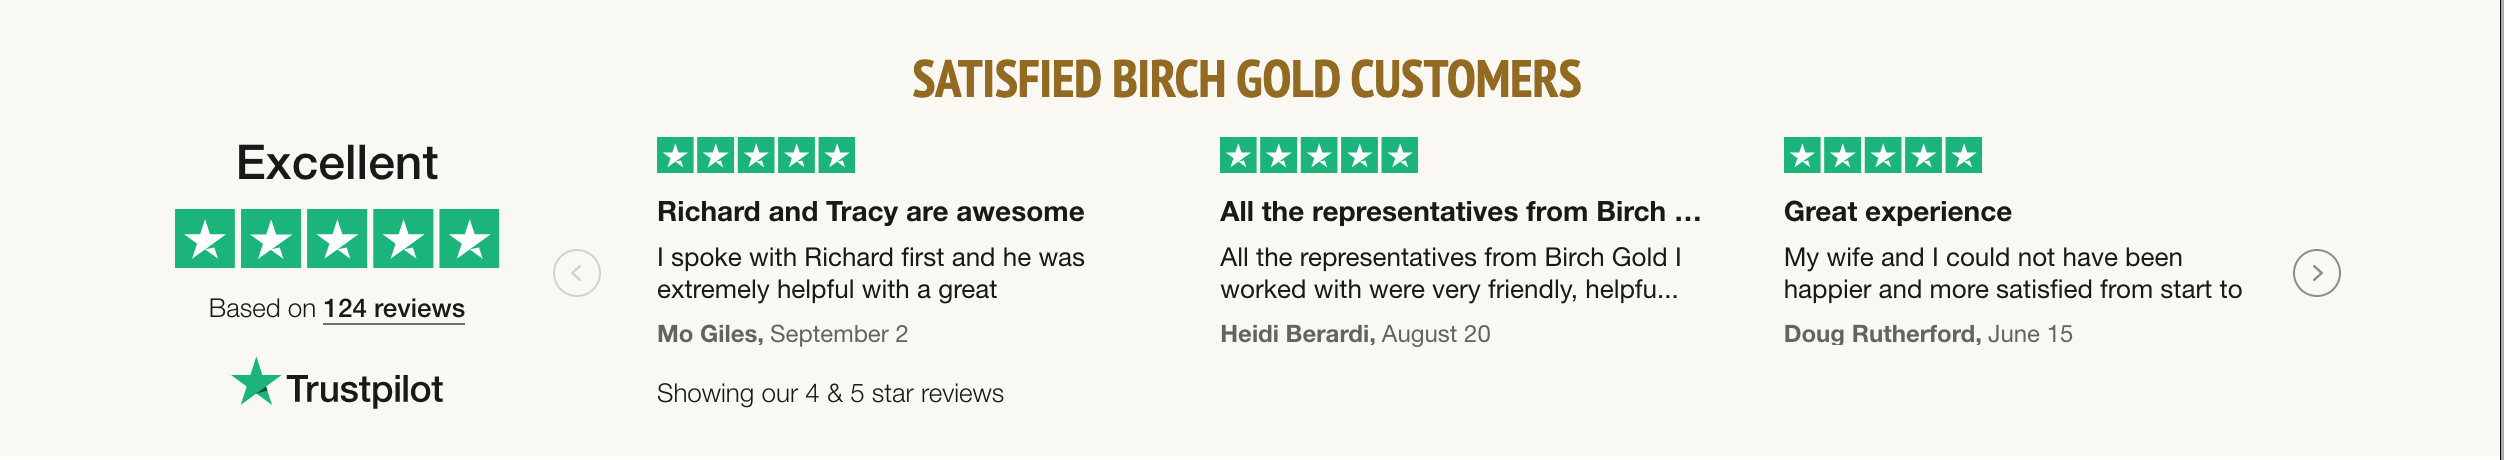 satisfied Birch Gold Group customers